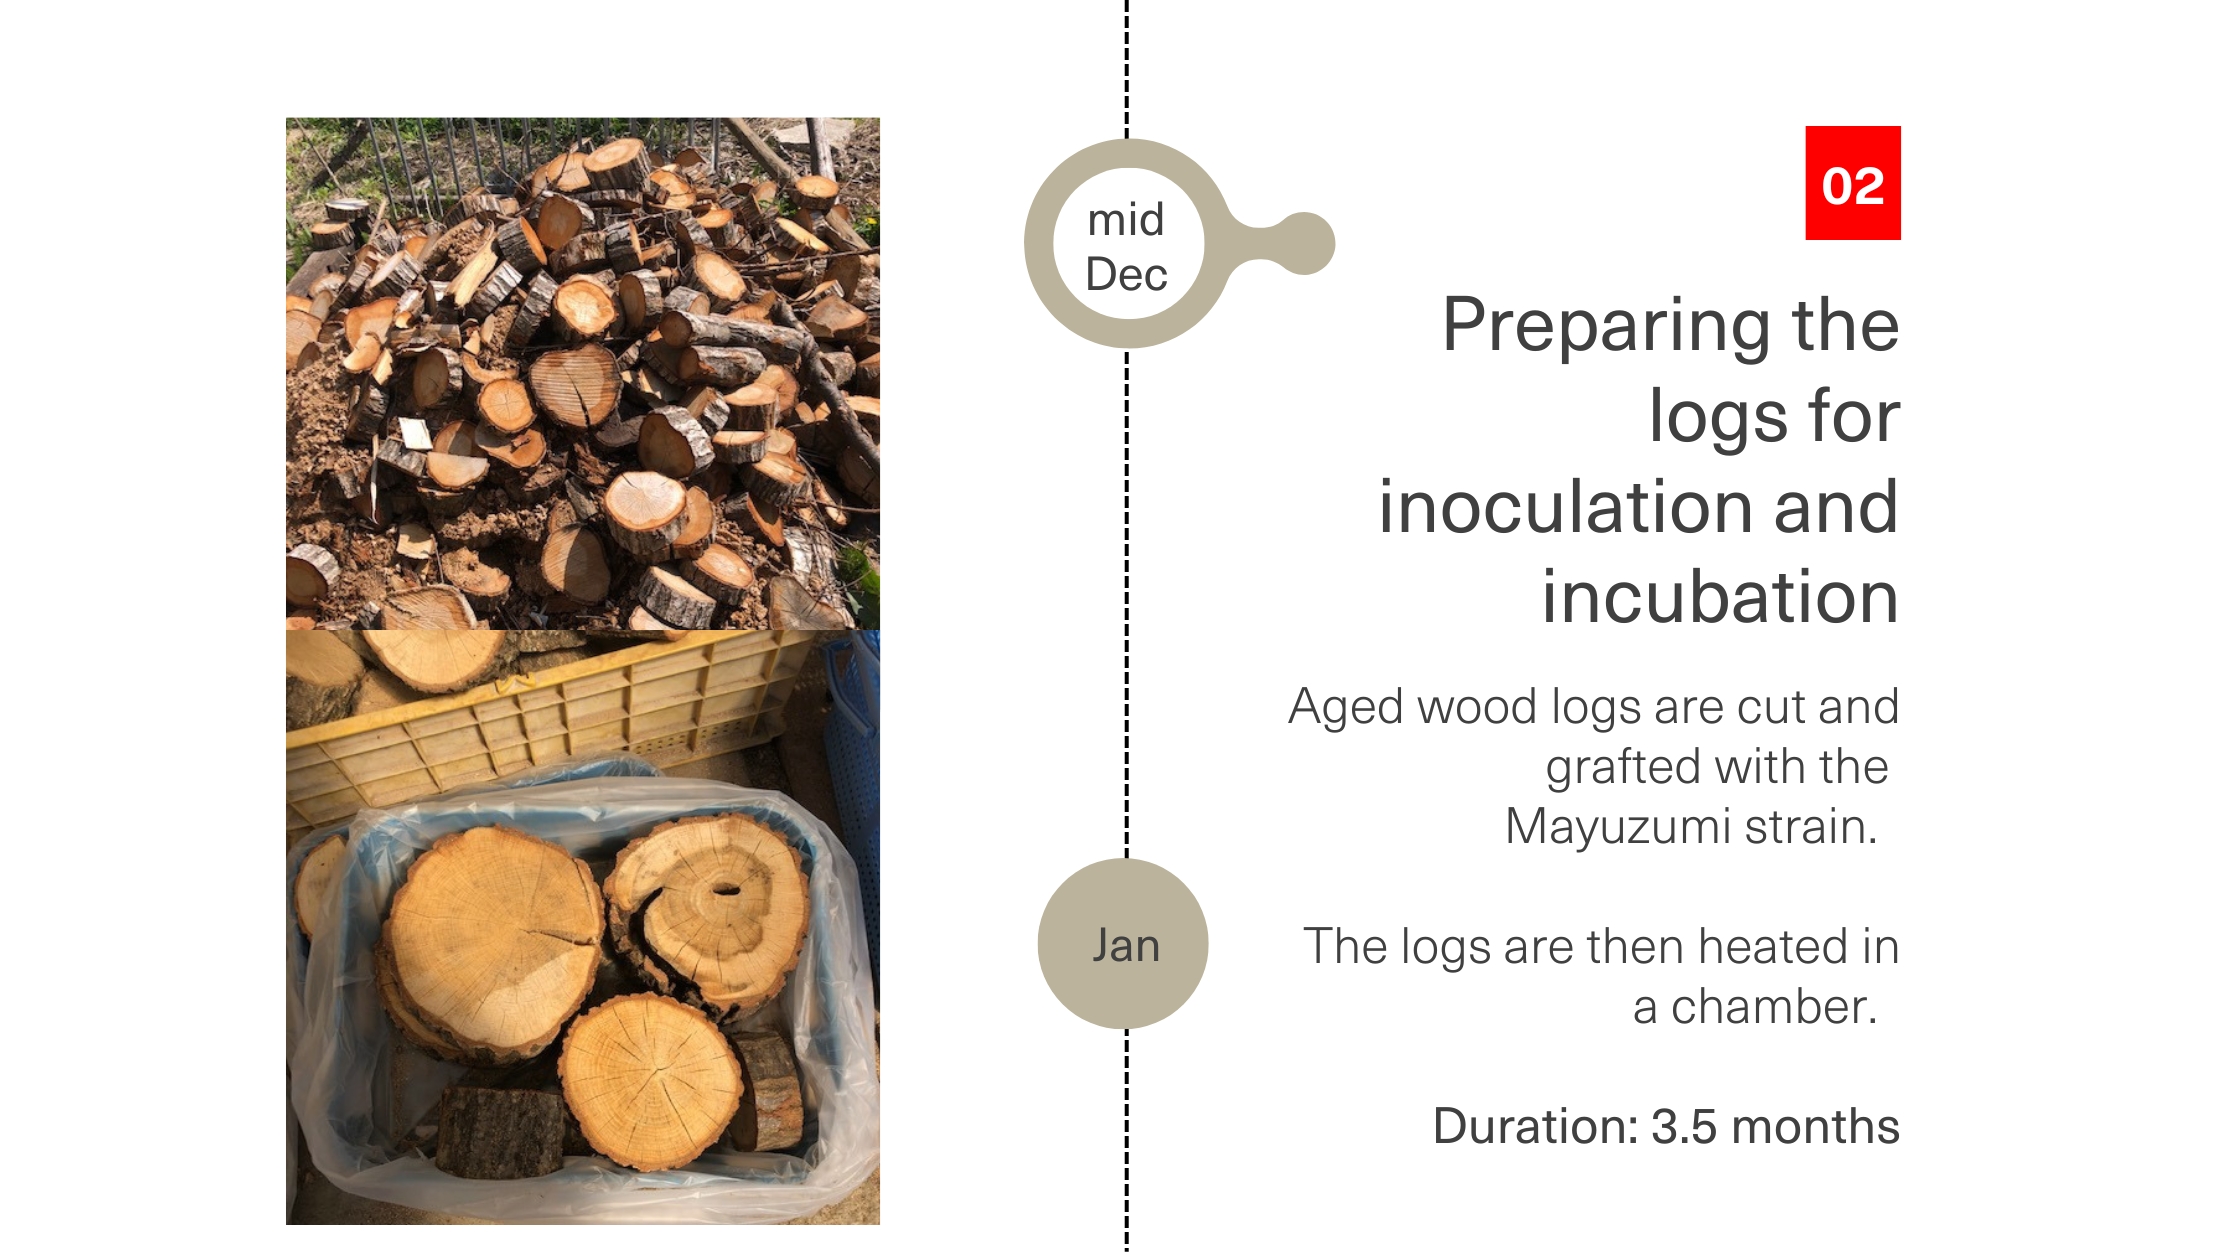 Preparing the logs for inoculation and incubation